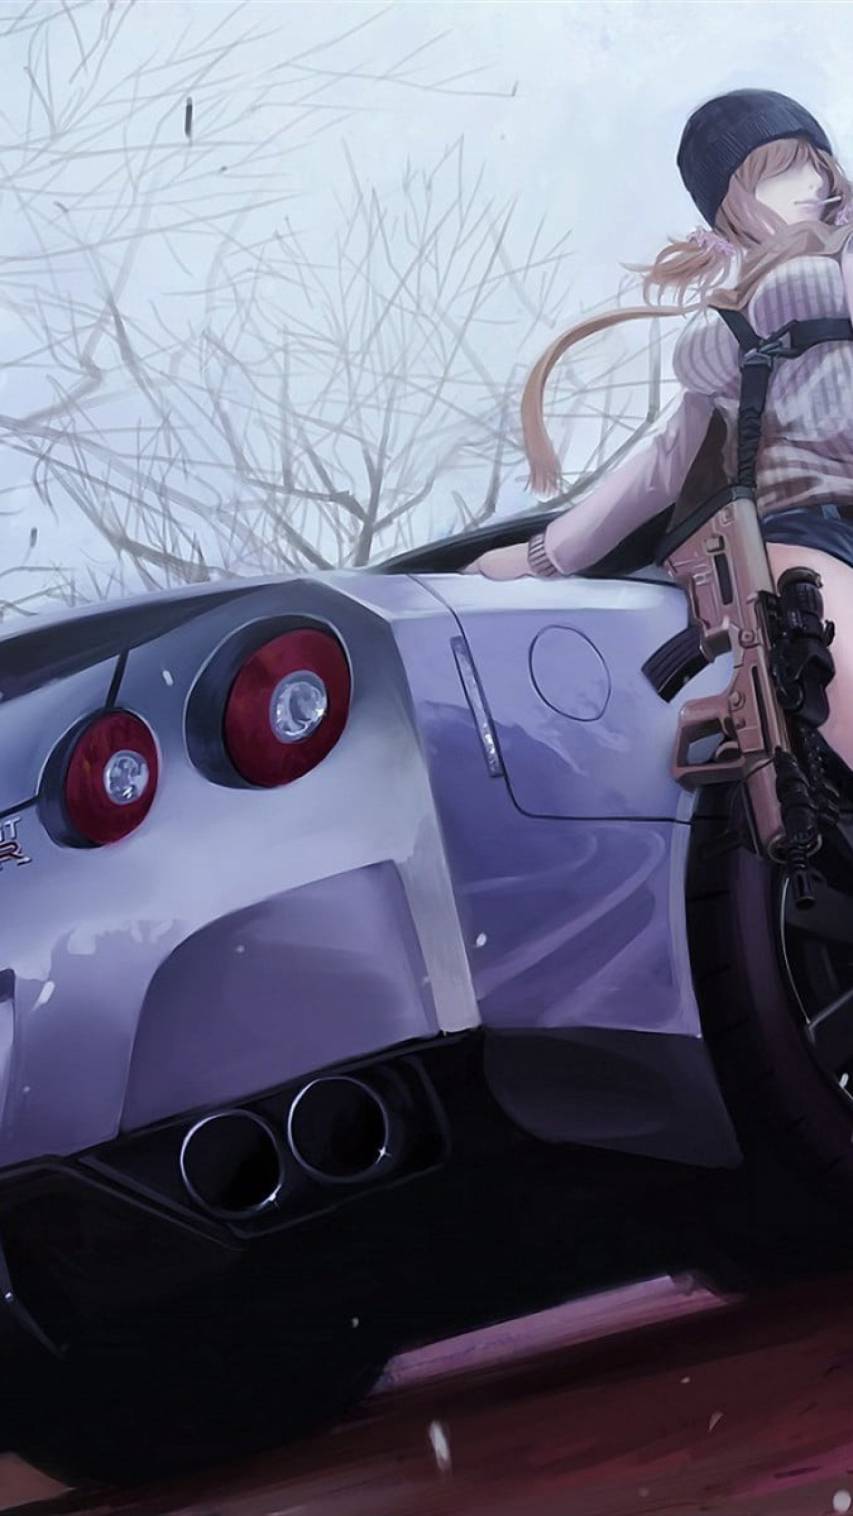 A girl in anime style is sitting on top of the car - JDM, cars